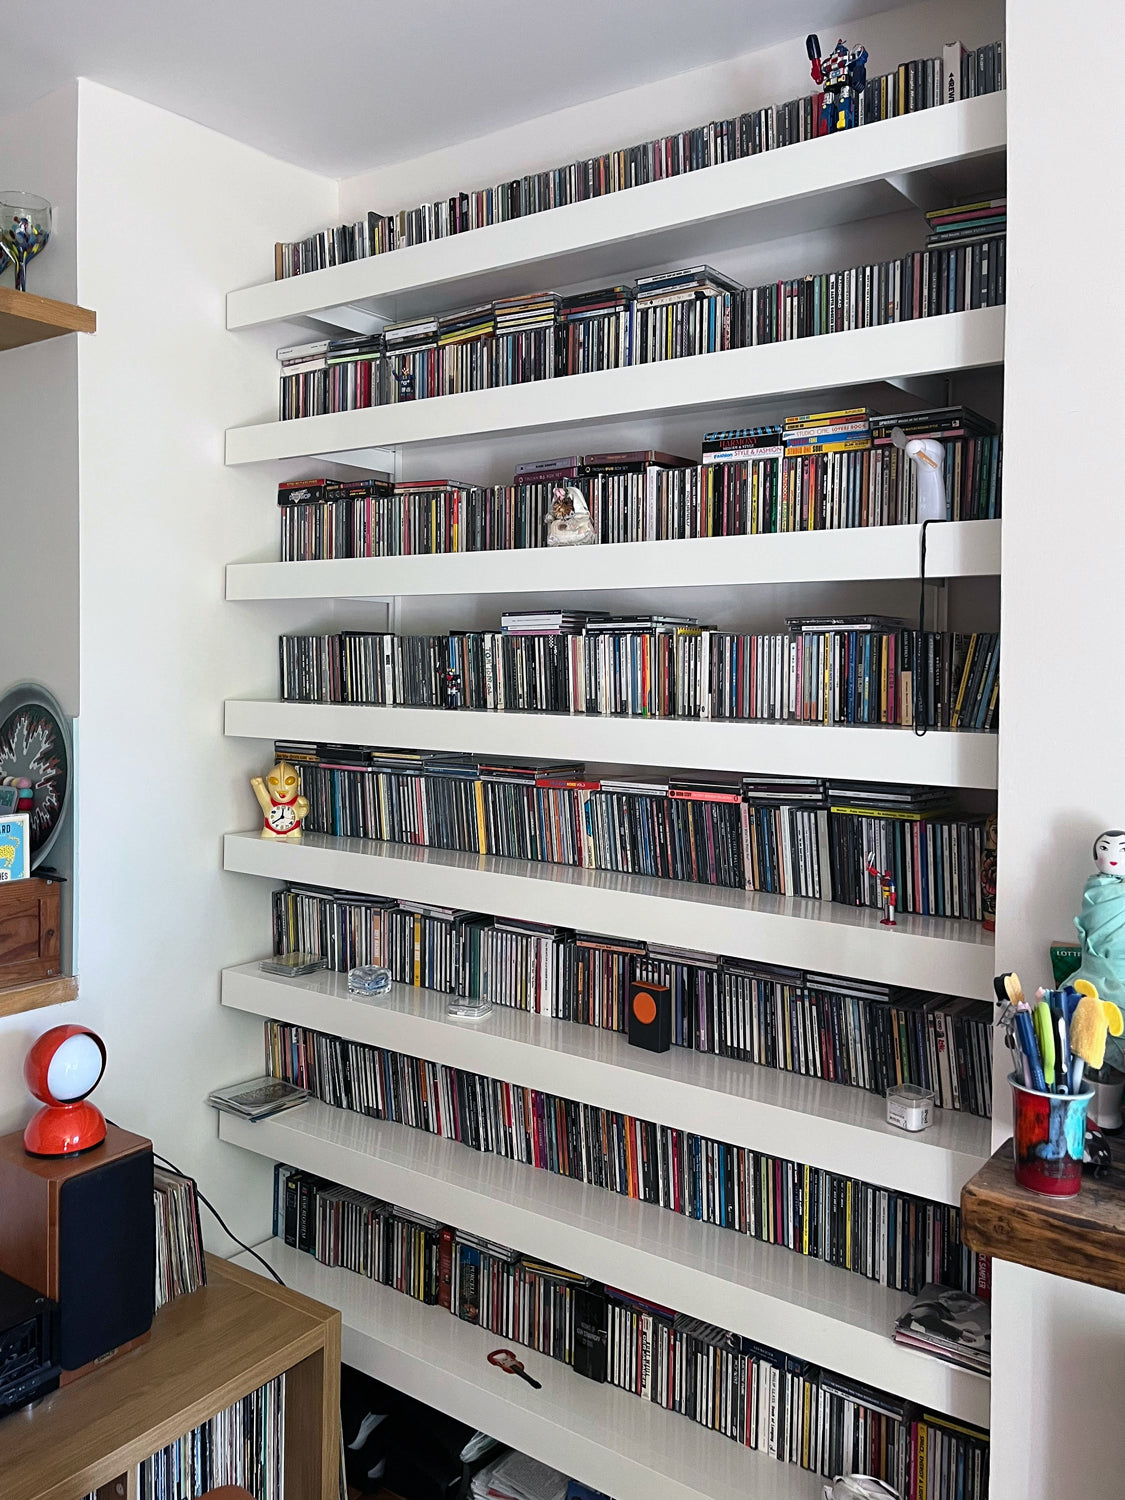 cd collection in alcove on white wall mounted shelving